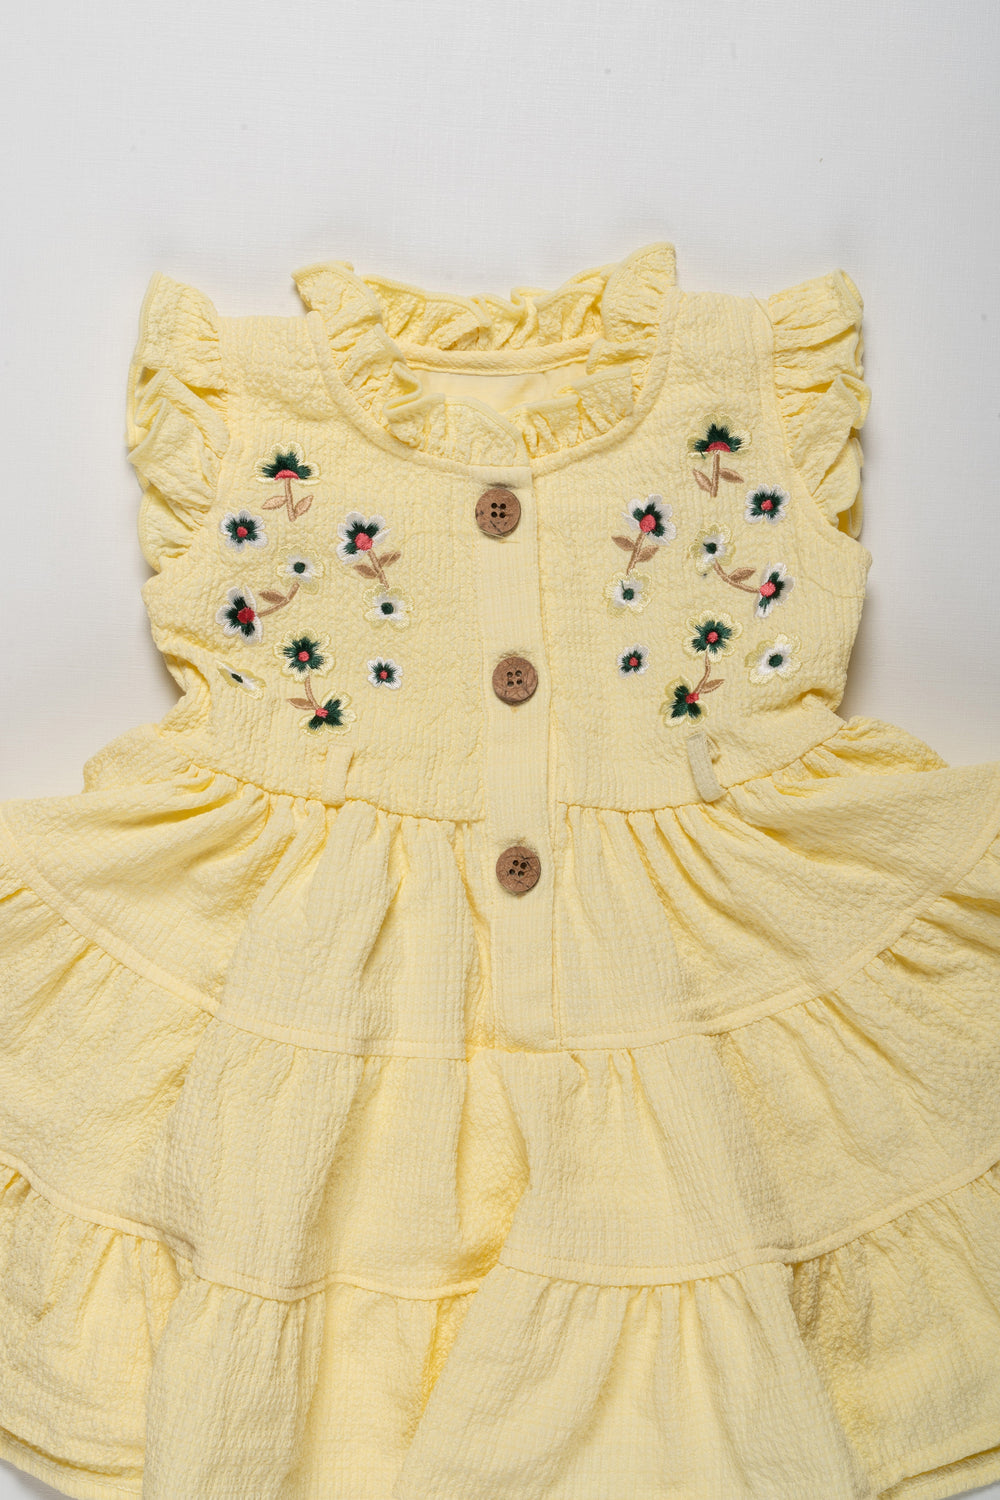 The Nesavu Girls Cotton Frock Charming Girls Yellow Ruffle Cotton Frock with Floral Embroidery Nesavu Charming Girls Yellow Ruffle Cotton Frock with Floral Embroidery | The Nesavu